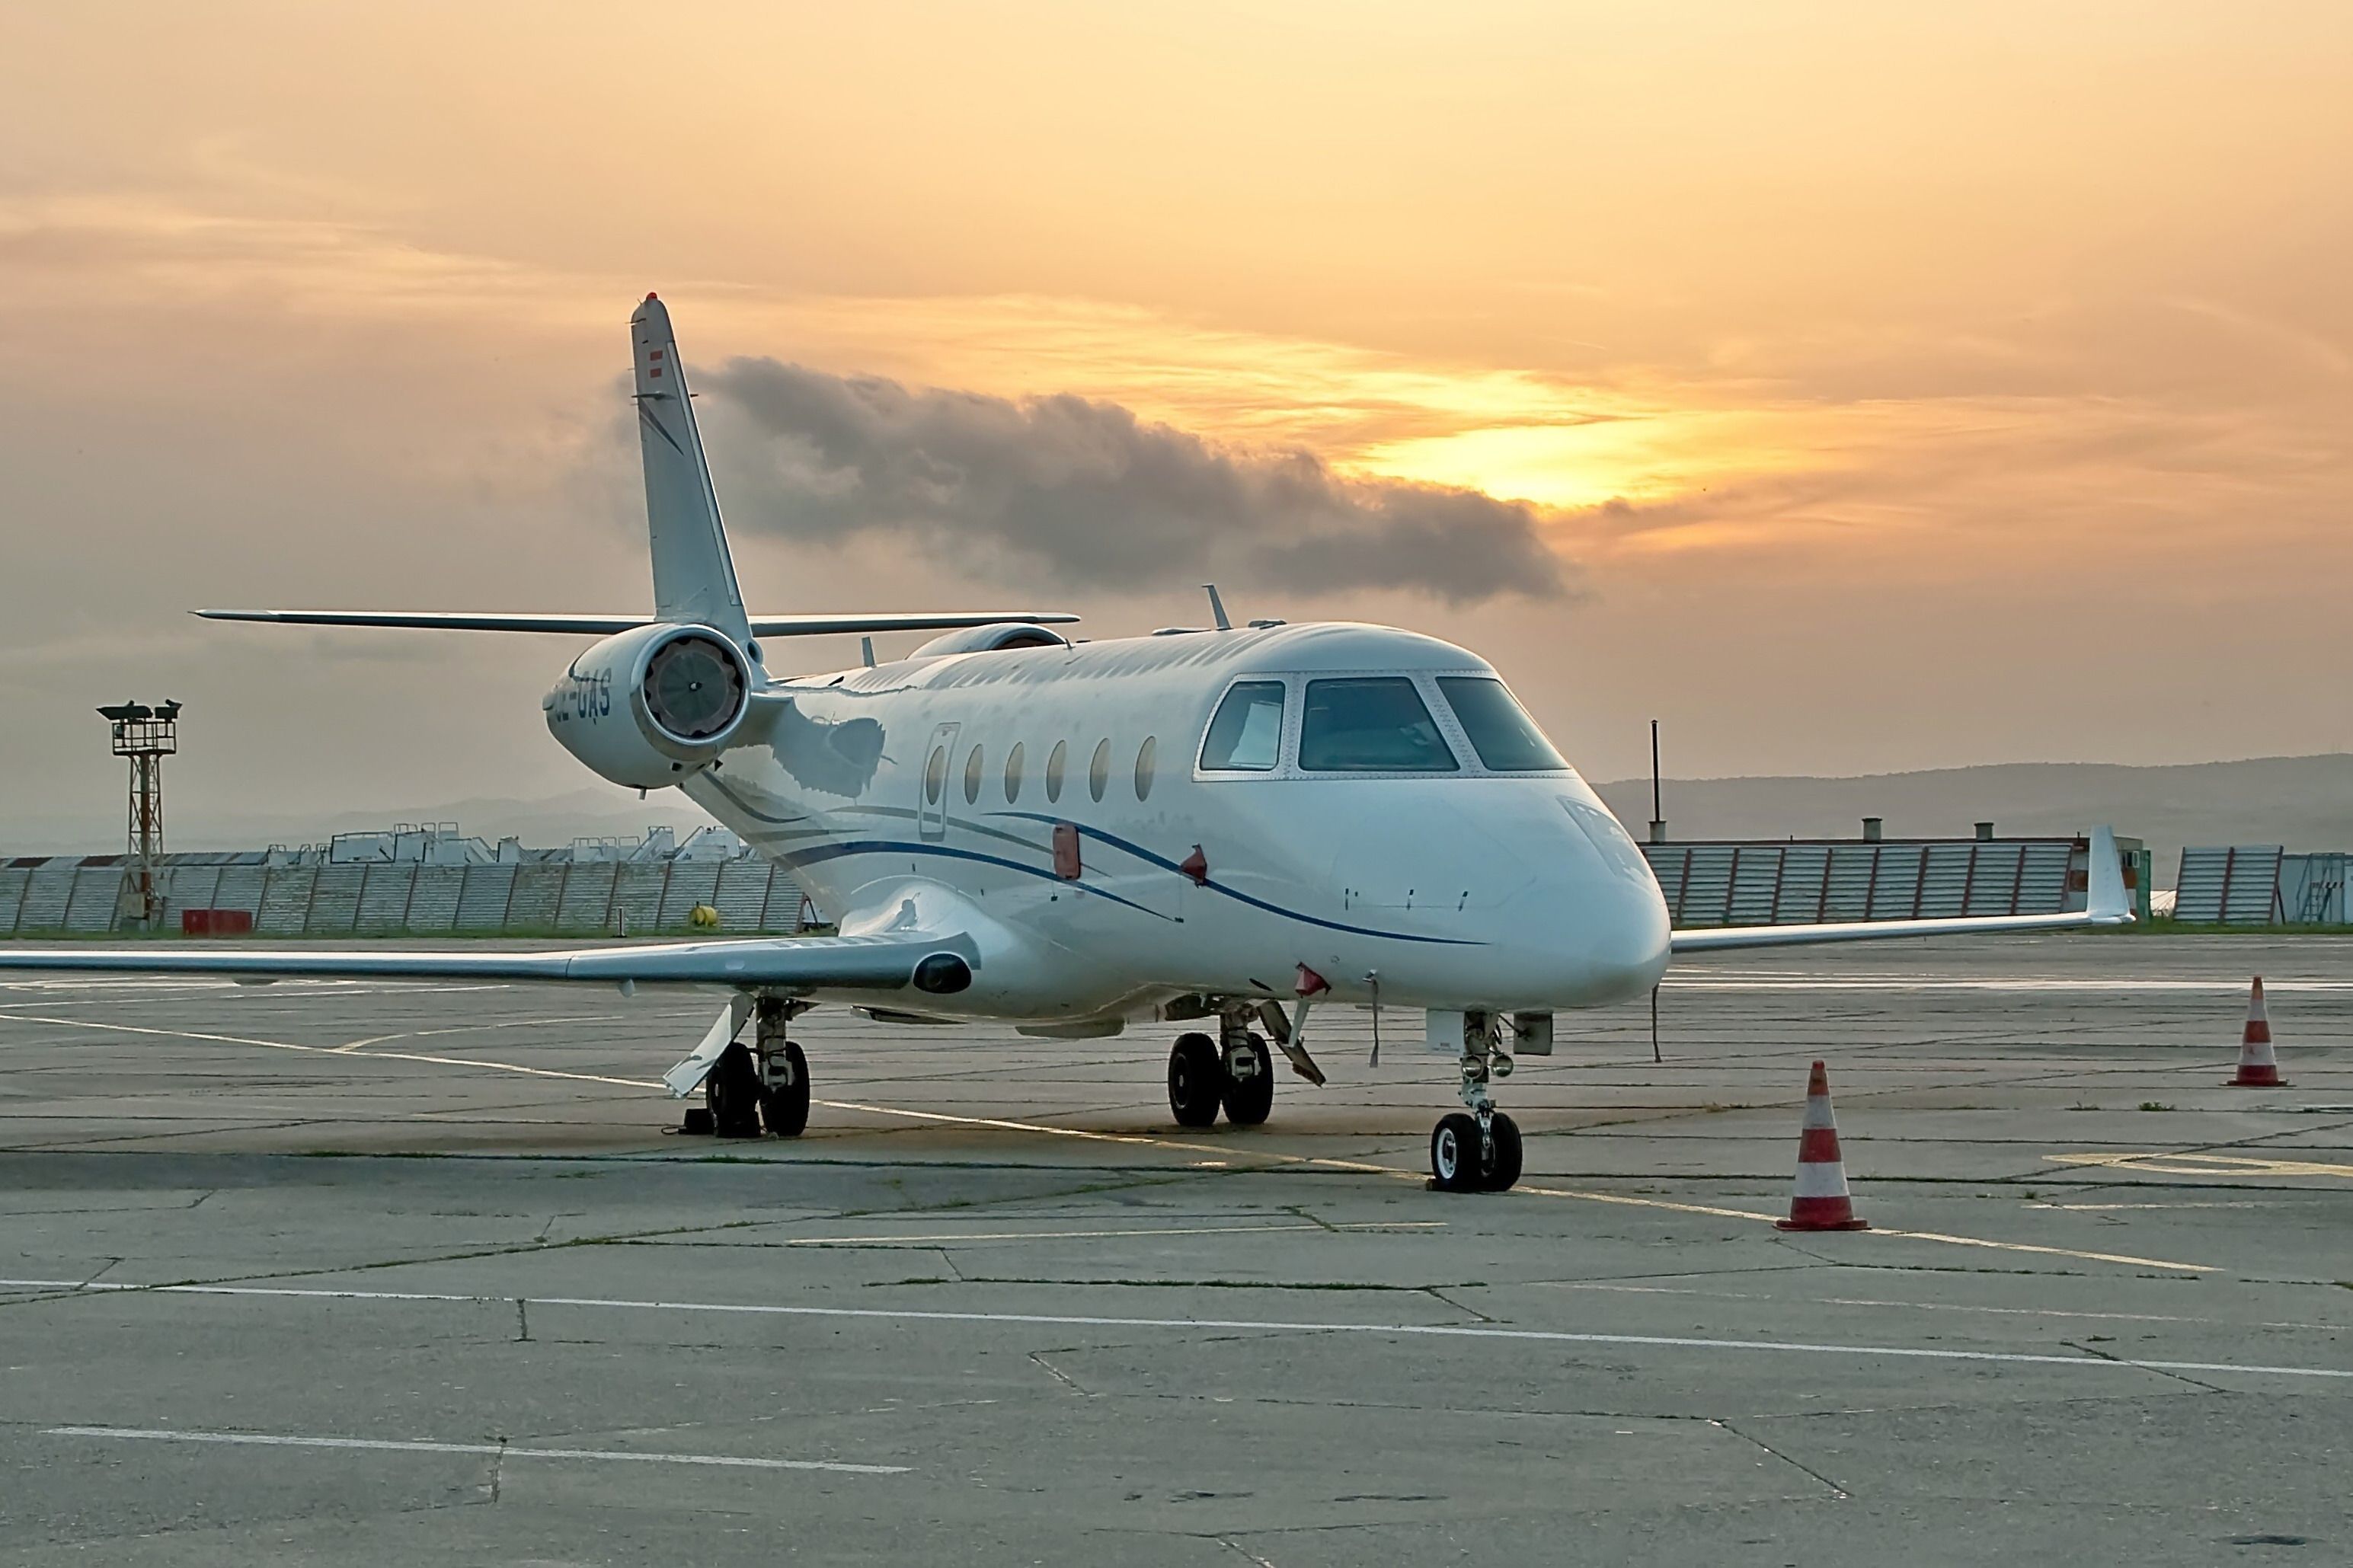 A Gulfstream G150 parked on an airport apron during sunset.